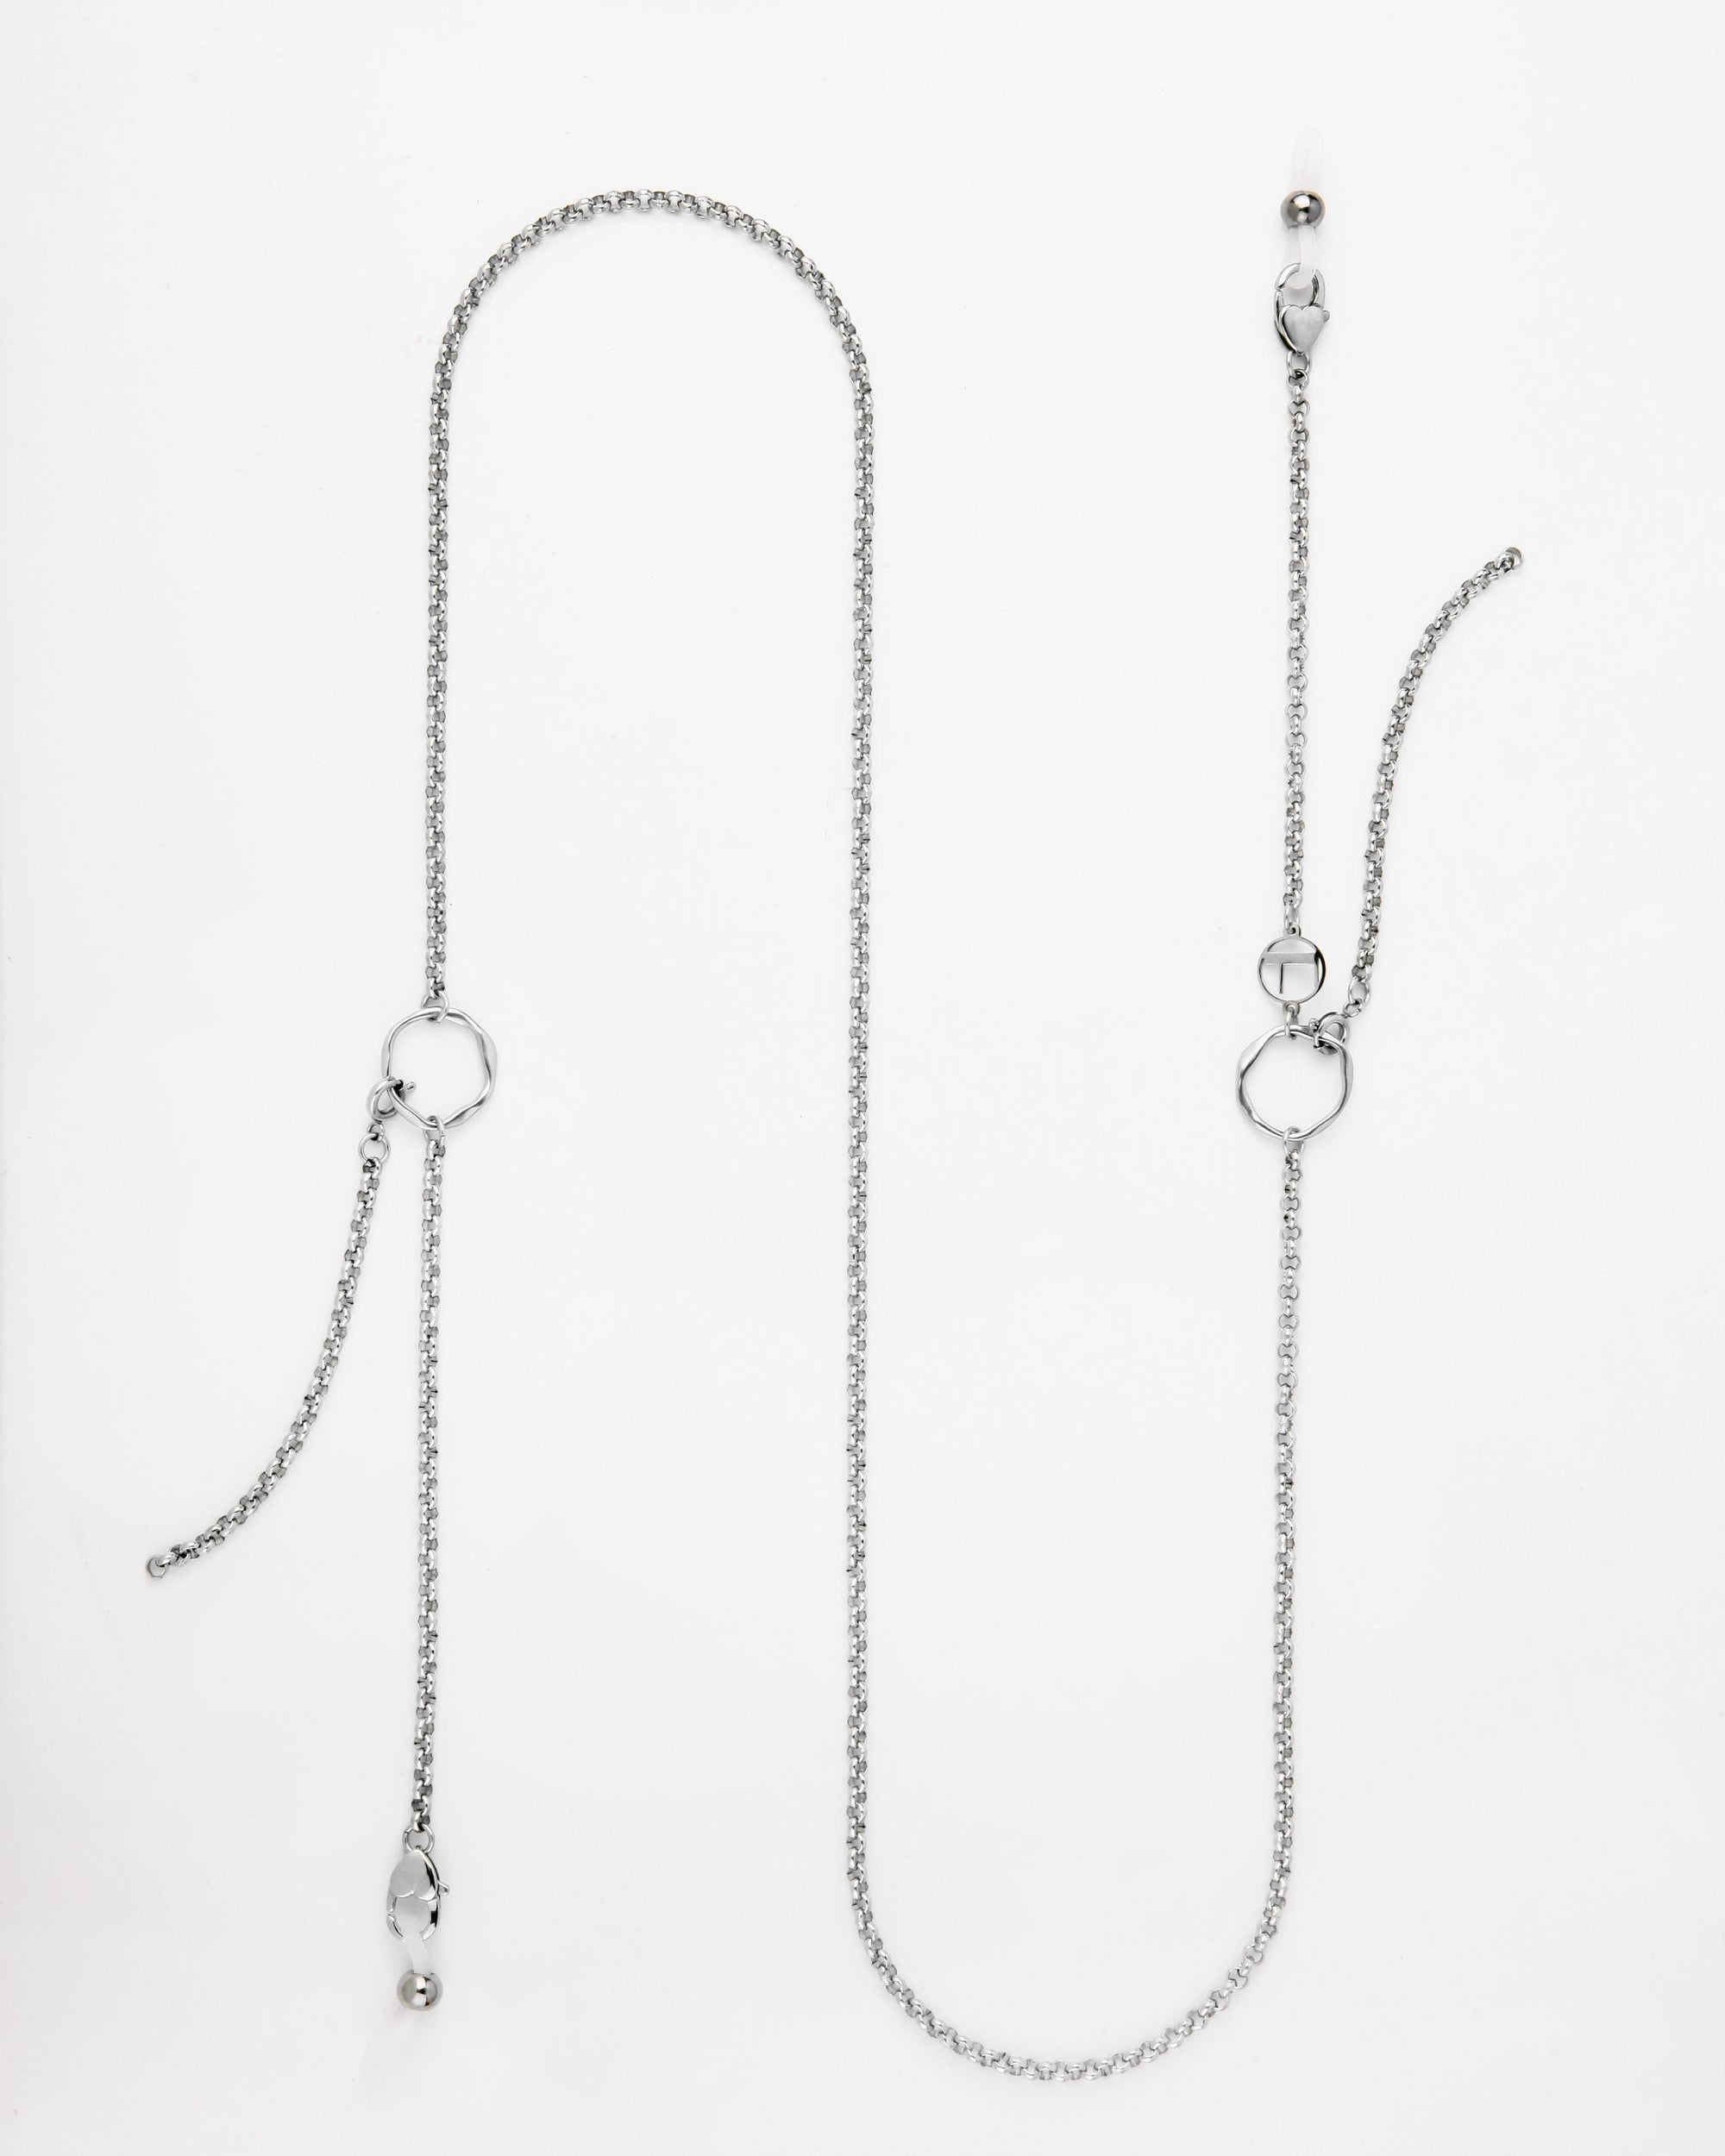 This image shows a long, delicate Florentina Glasses Chain by For Art's Sake®. The chain features two small geometric pendants and two dangling ends, each embellished with a small silver or pearl-like bead. The necklace is laid out flat against a plain white background.